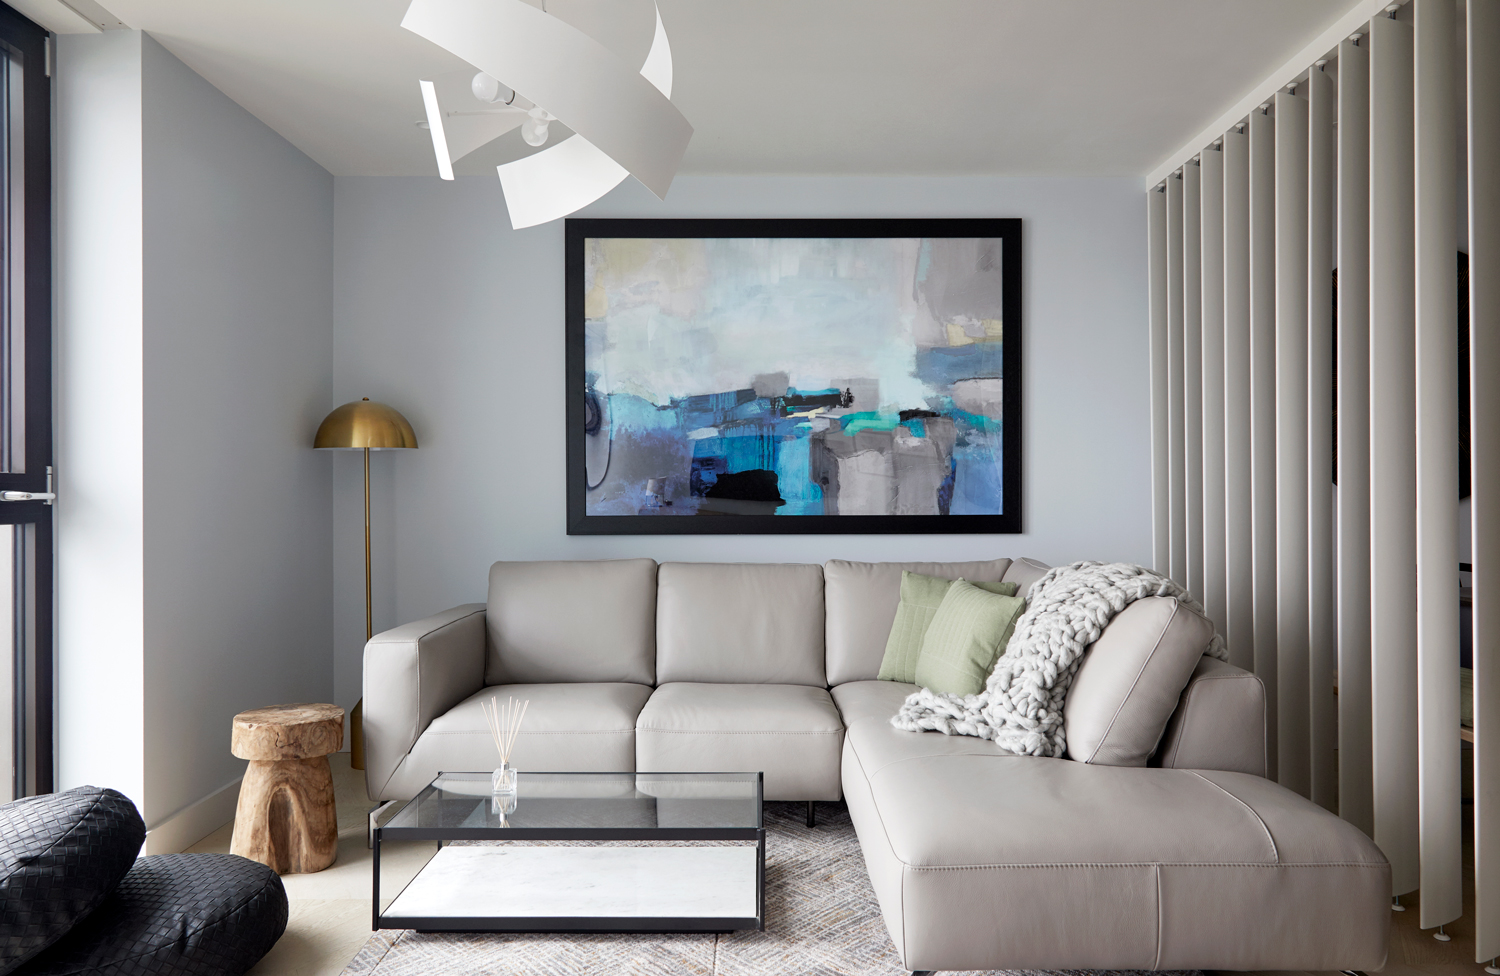 A large piece of art designed to balance the minimalist look to the rest of the room. The blues within this piece of art give depth to an otherwise flat colour scheme.